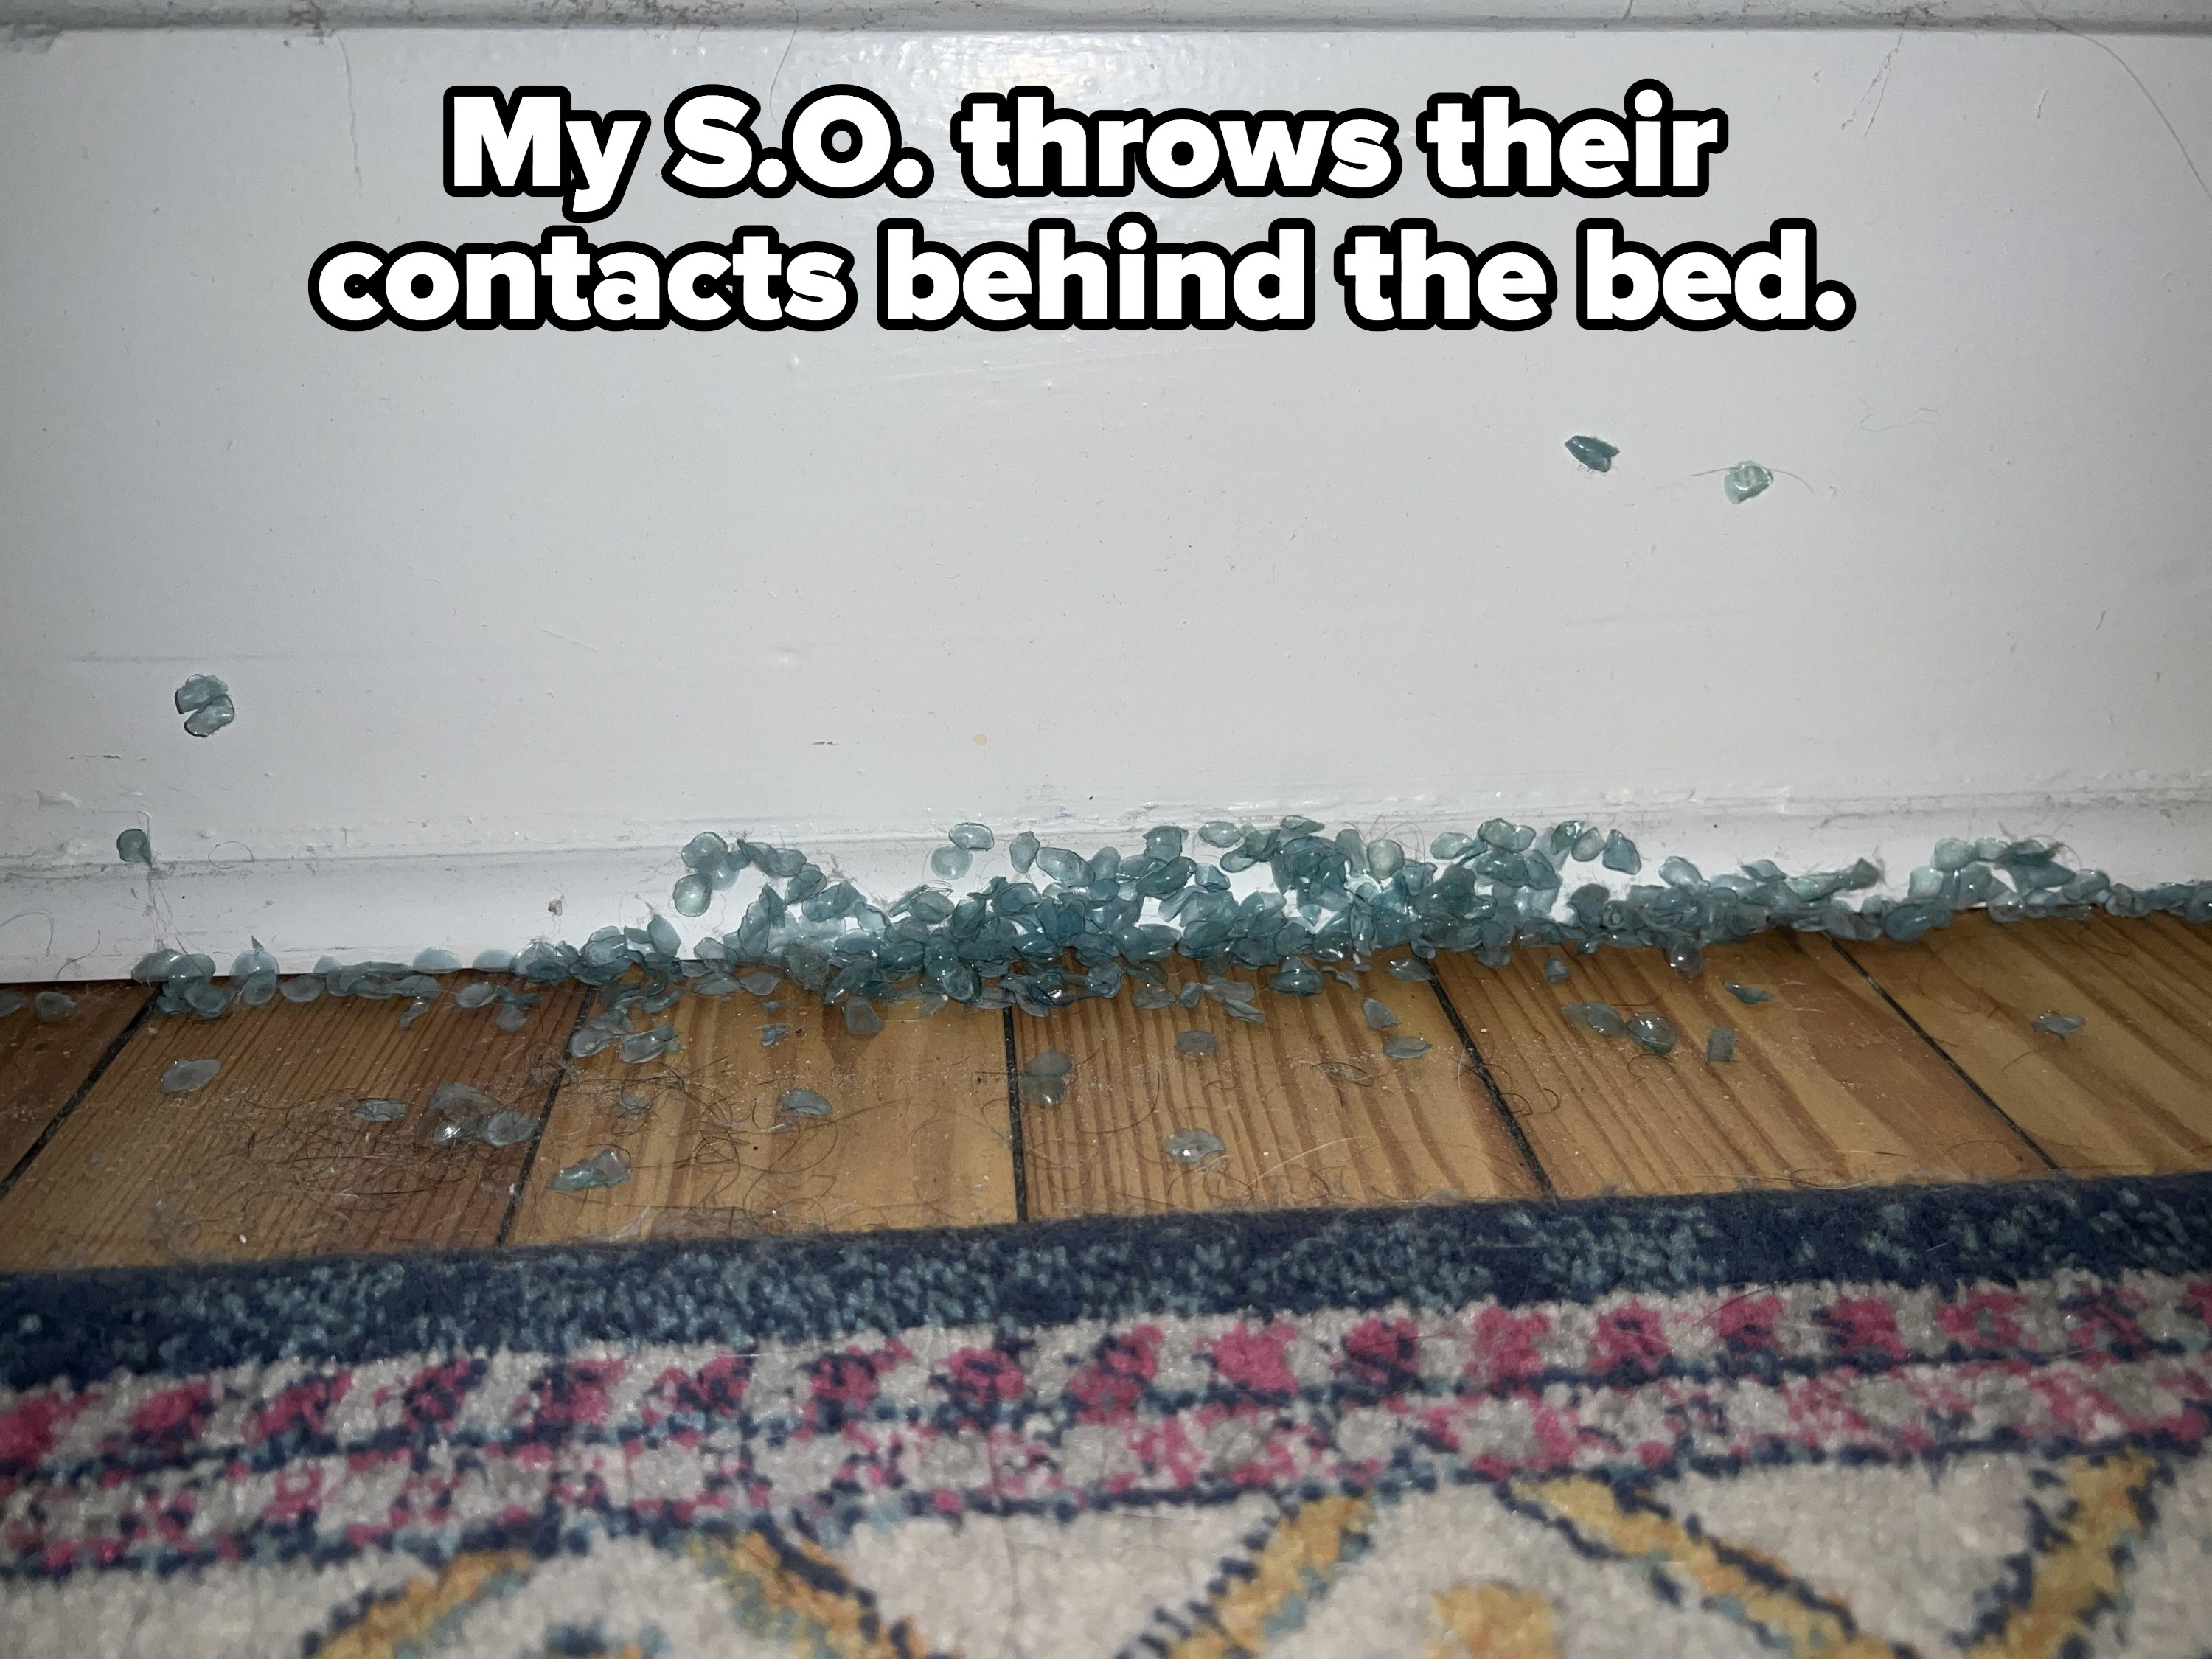 A pile of contact lenses deposited behind a bed